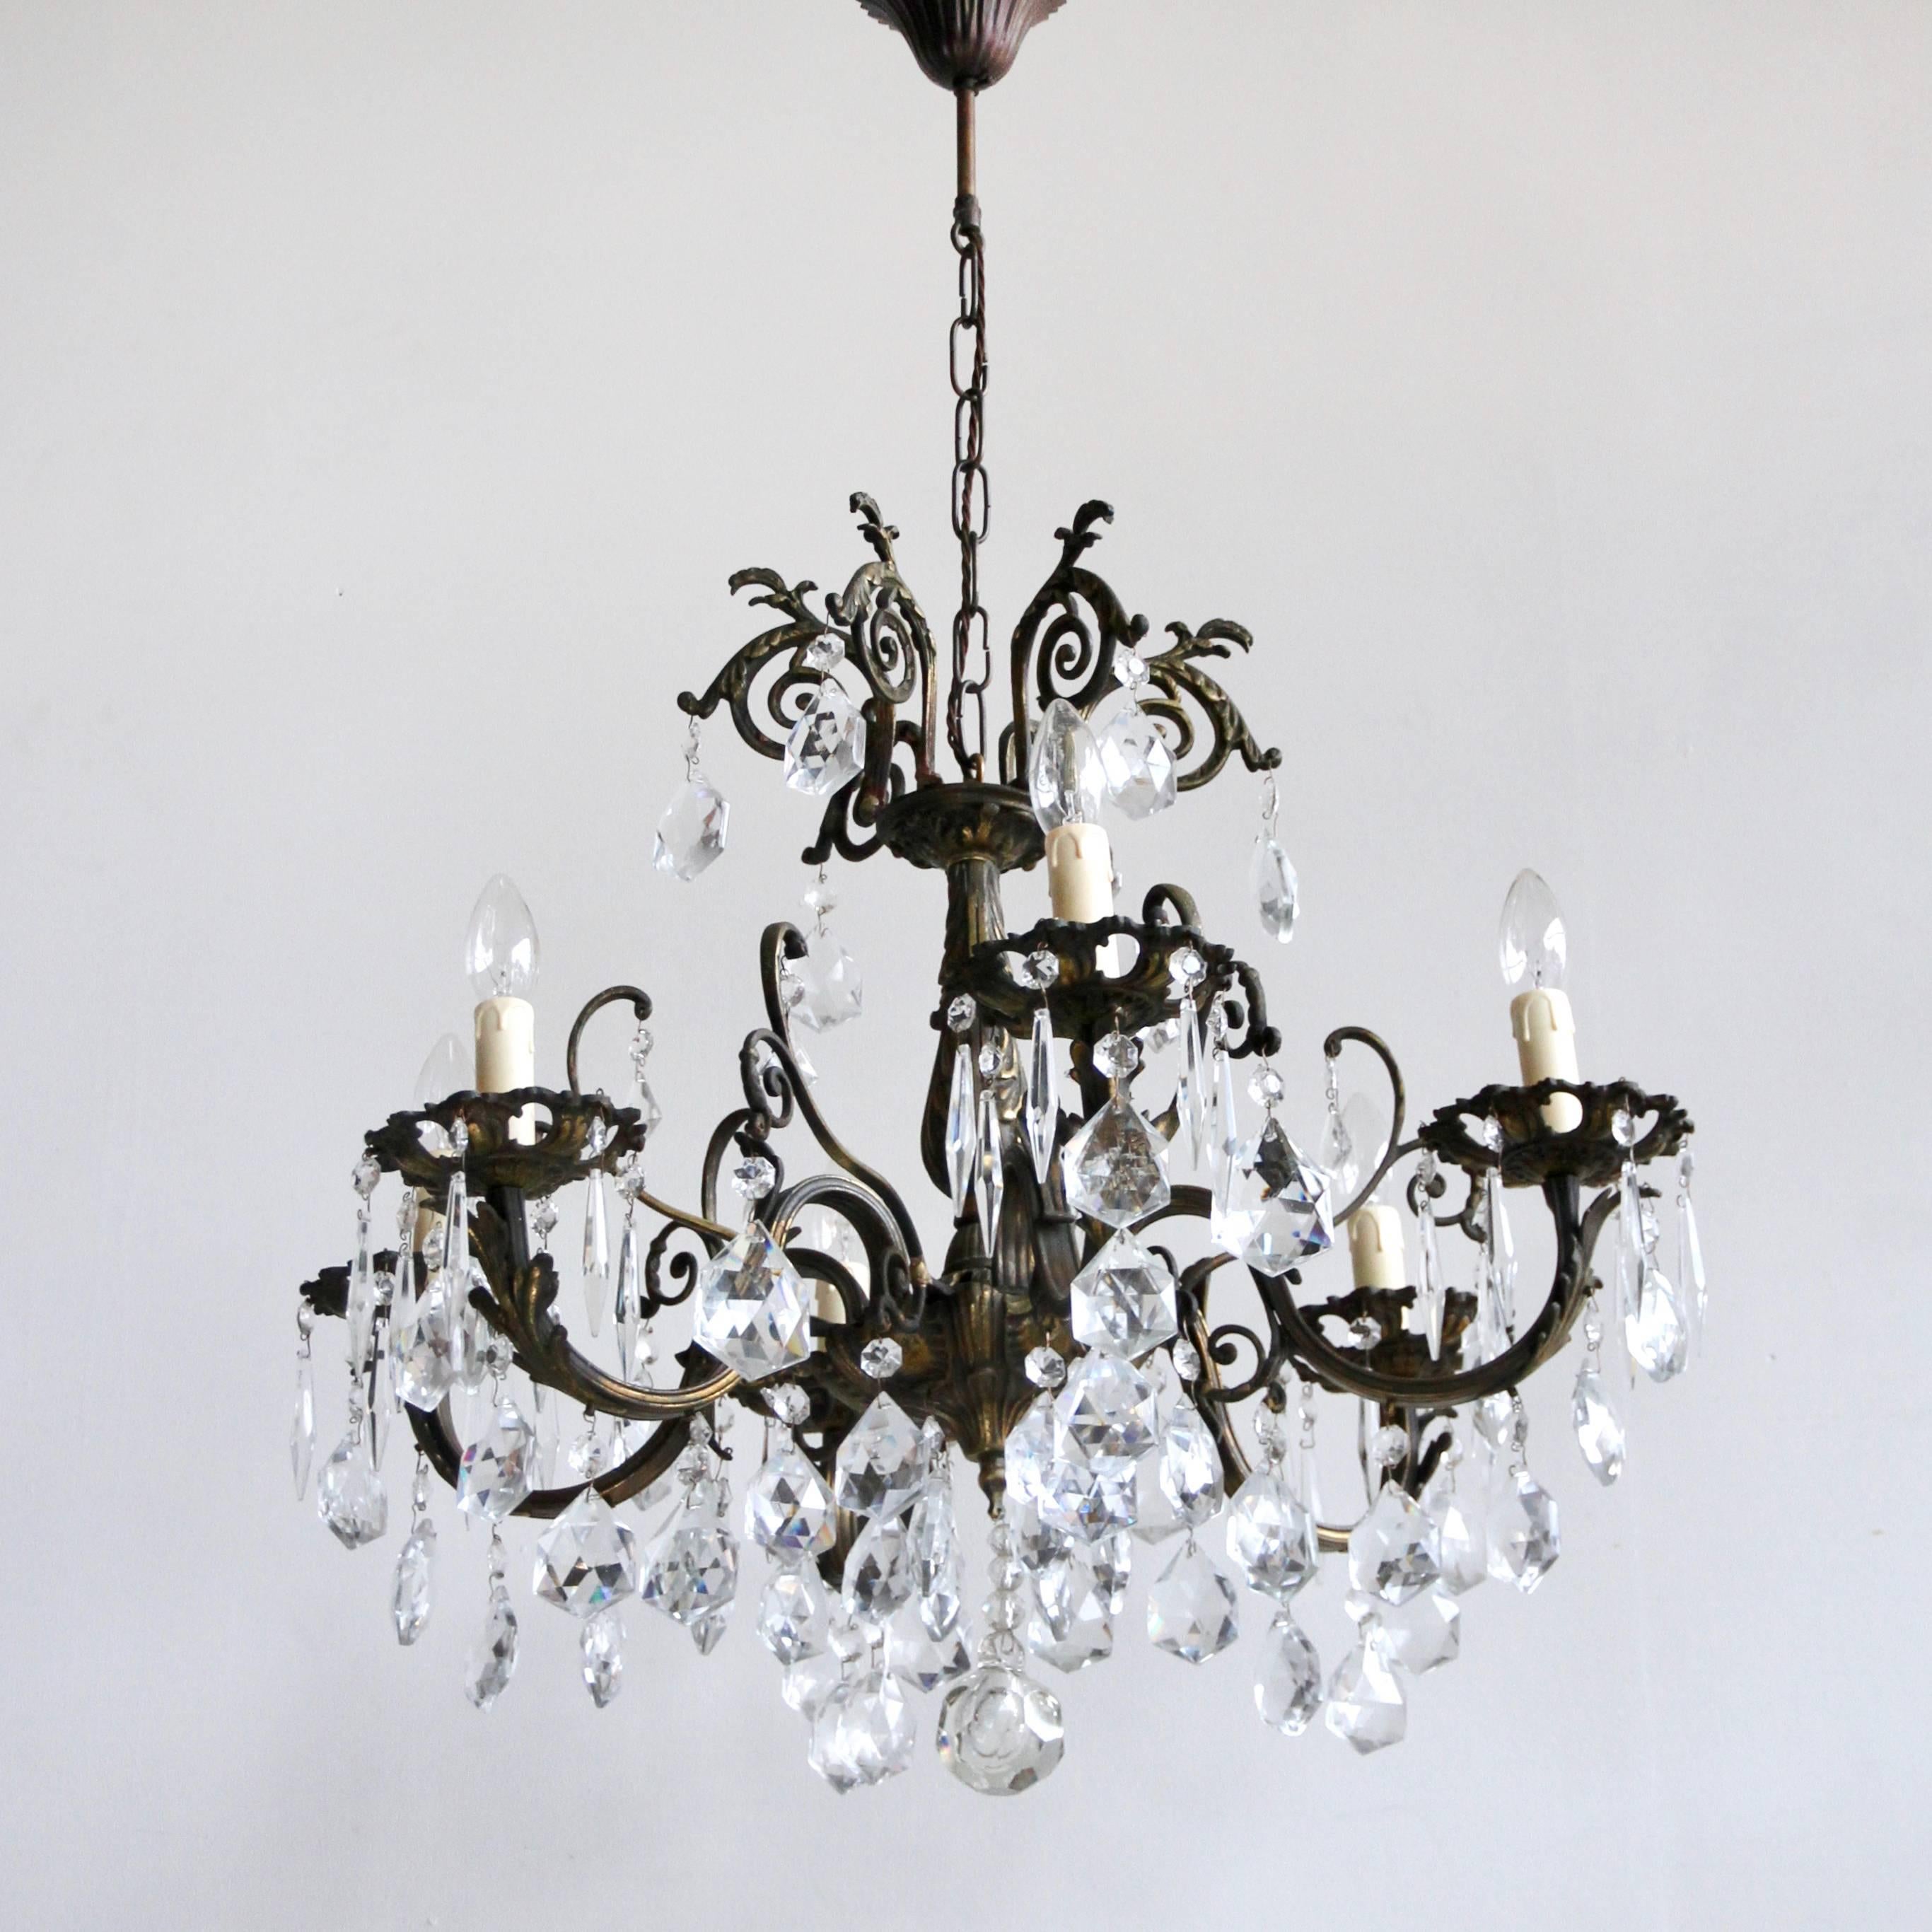 Fully rewired and restored this heavy cast ornate brass chandelier originates from 1920s France. Dressed in square cut crystal pears and crystal icicles it is an opulent centre piece. The chandelier would sit perfectly above a dining table in a